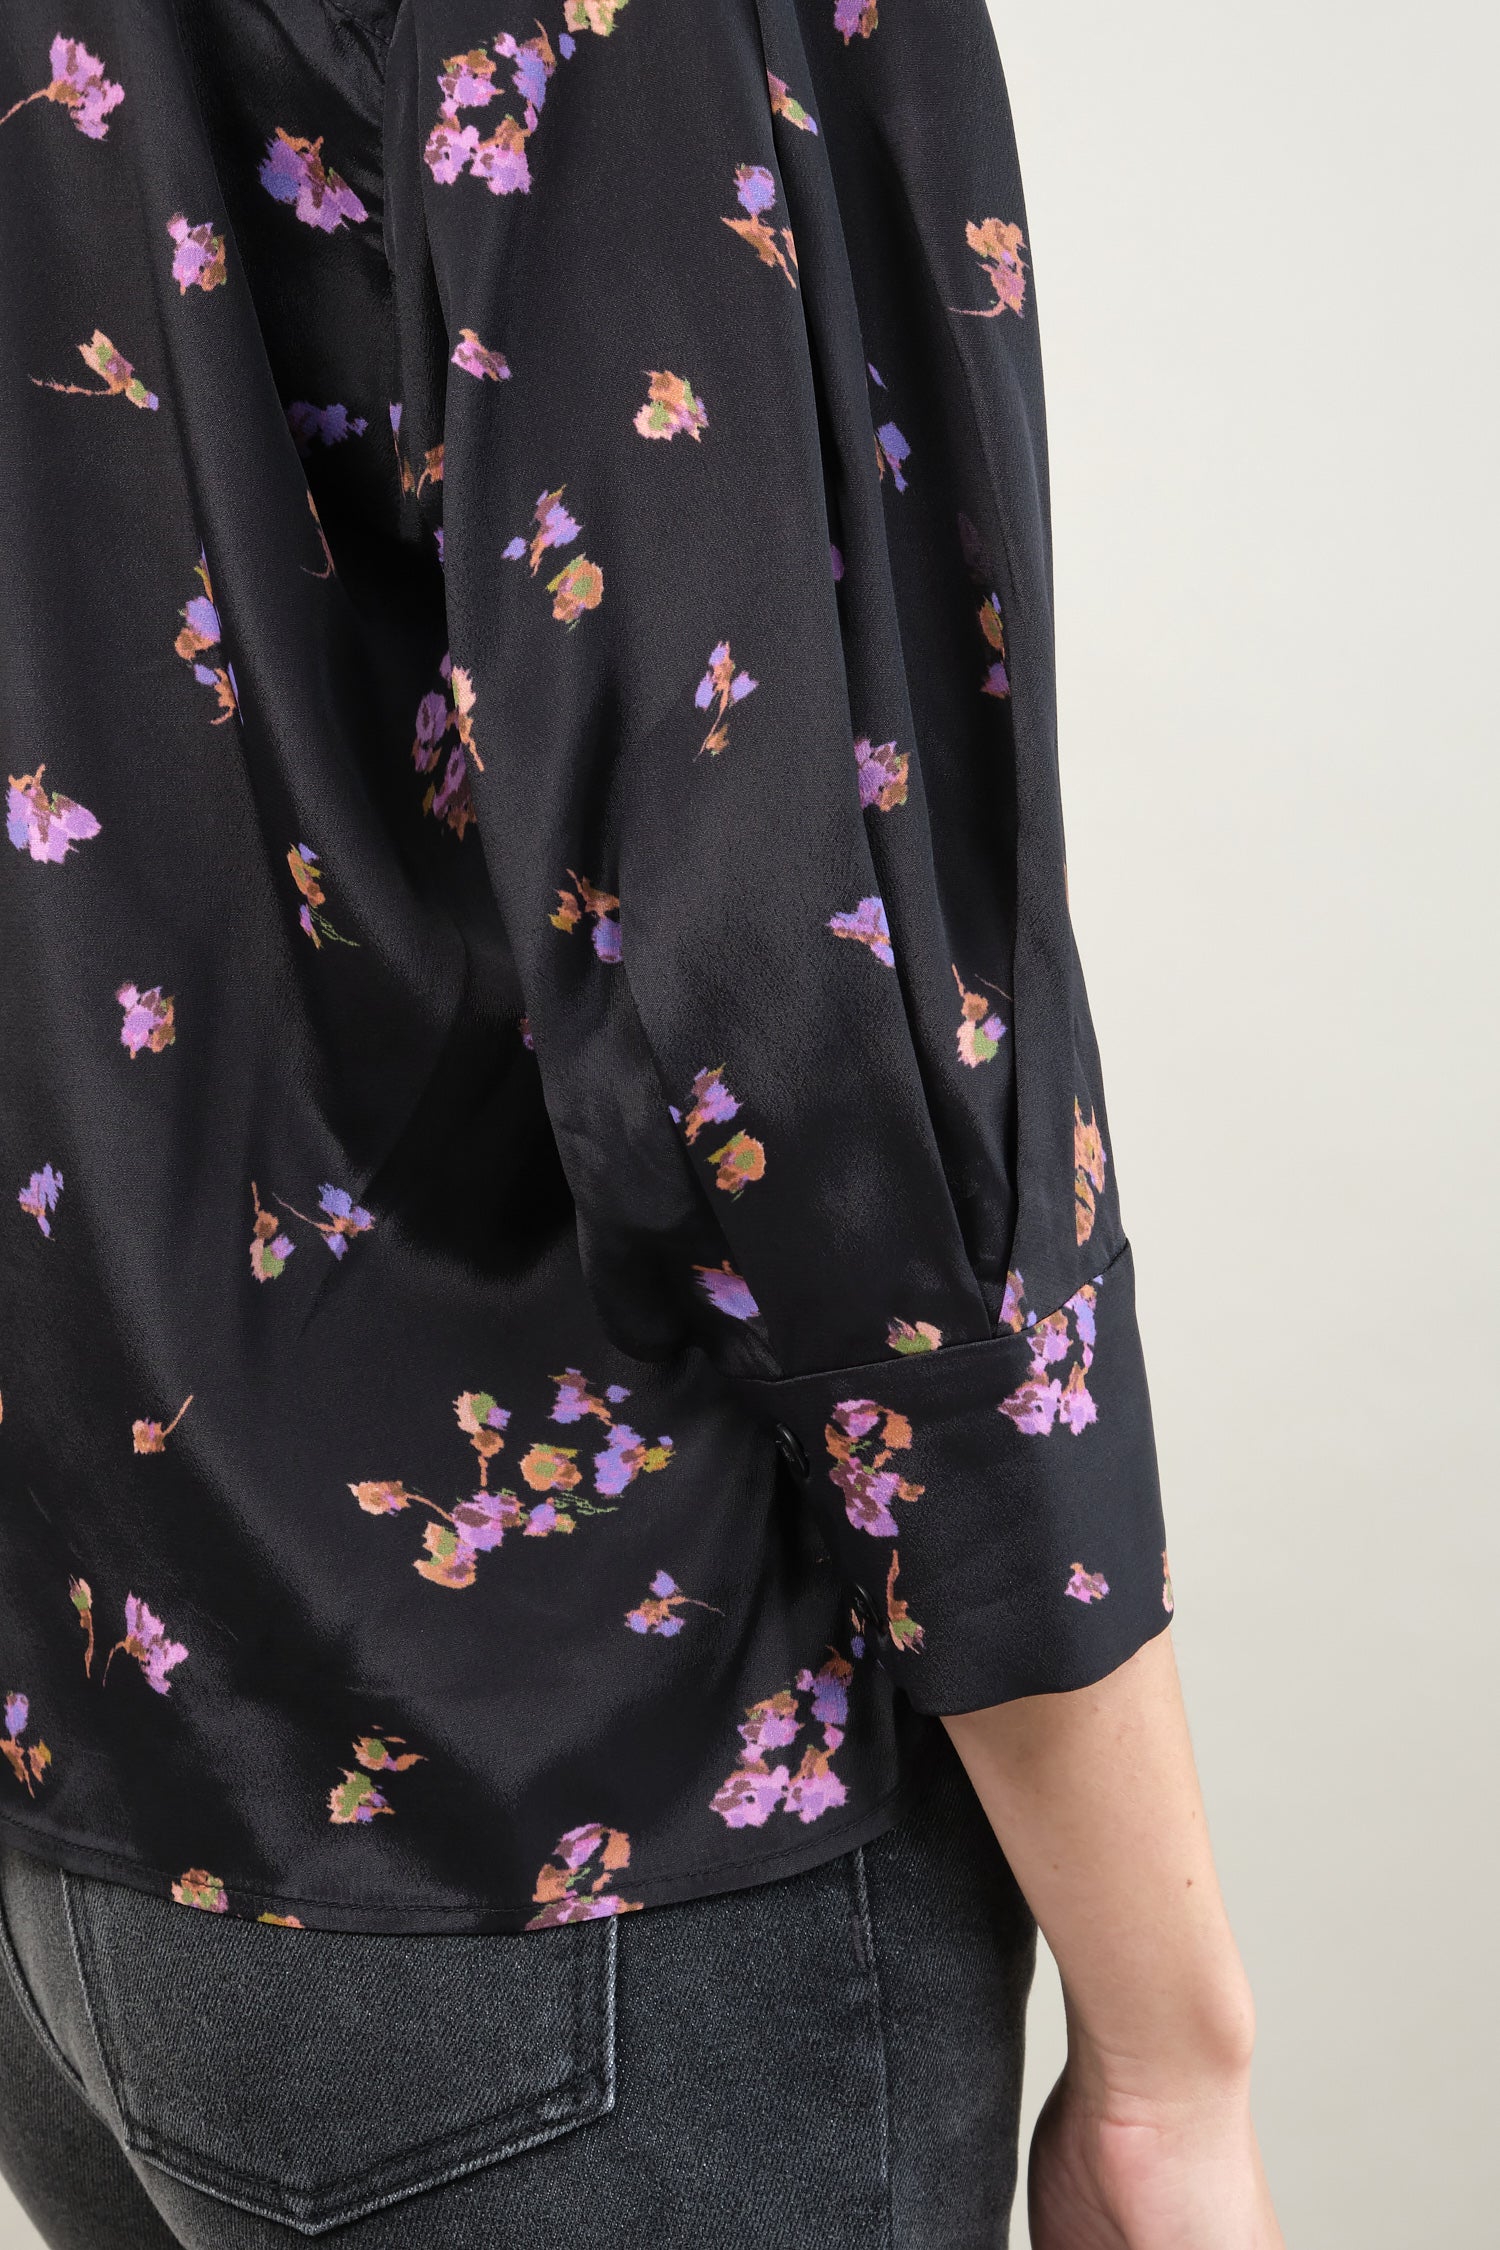 Sleeve on Turin Top in Violet Blossom